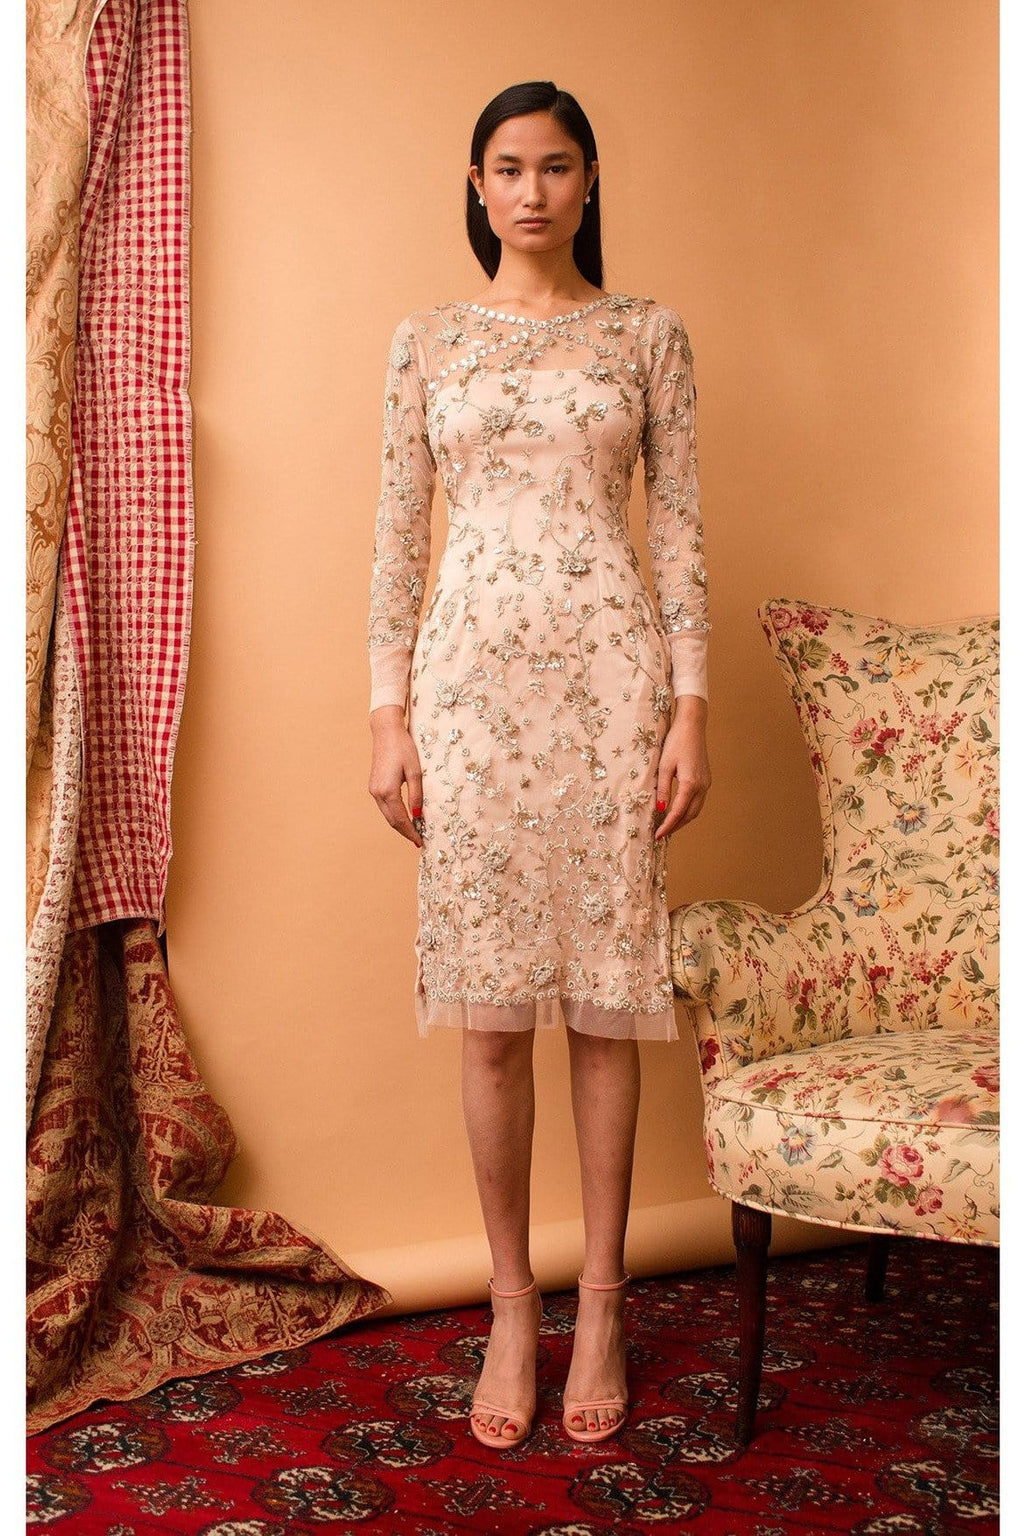 Lavanya Coodly XS / Blush Lavanya Coodly Women's Marie Blush Hand-Embroidered Knee-Length Cocktail Dress in 3 Dimensional Motifs